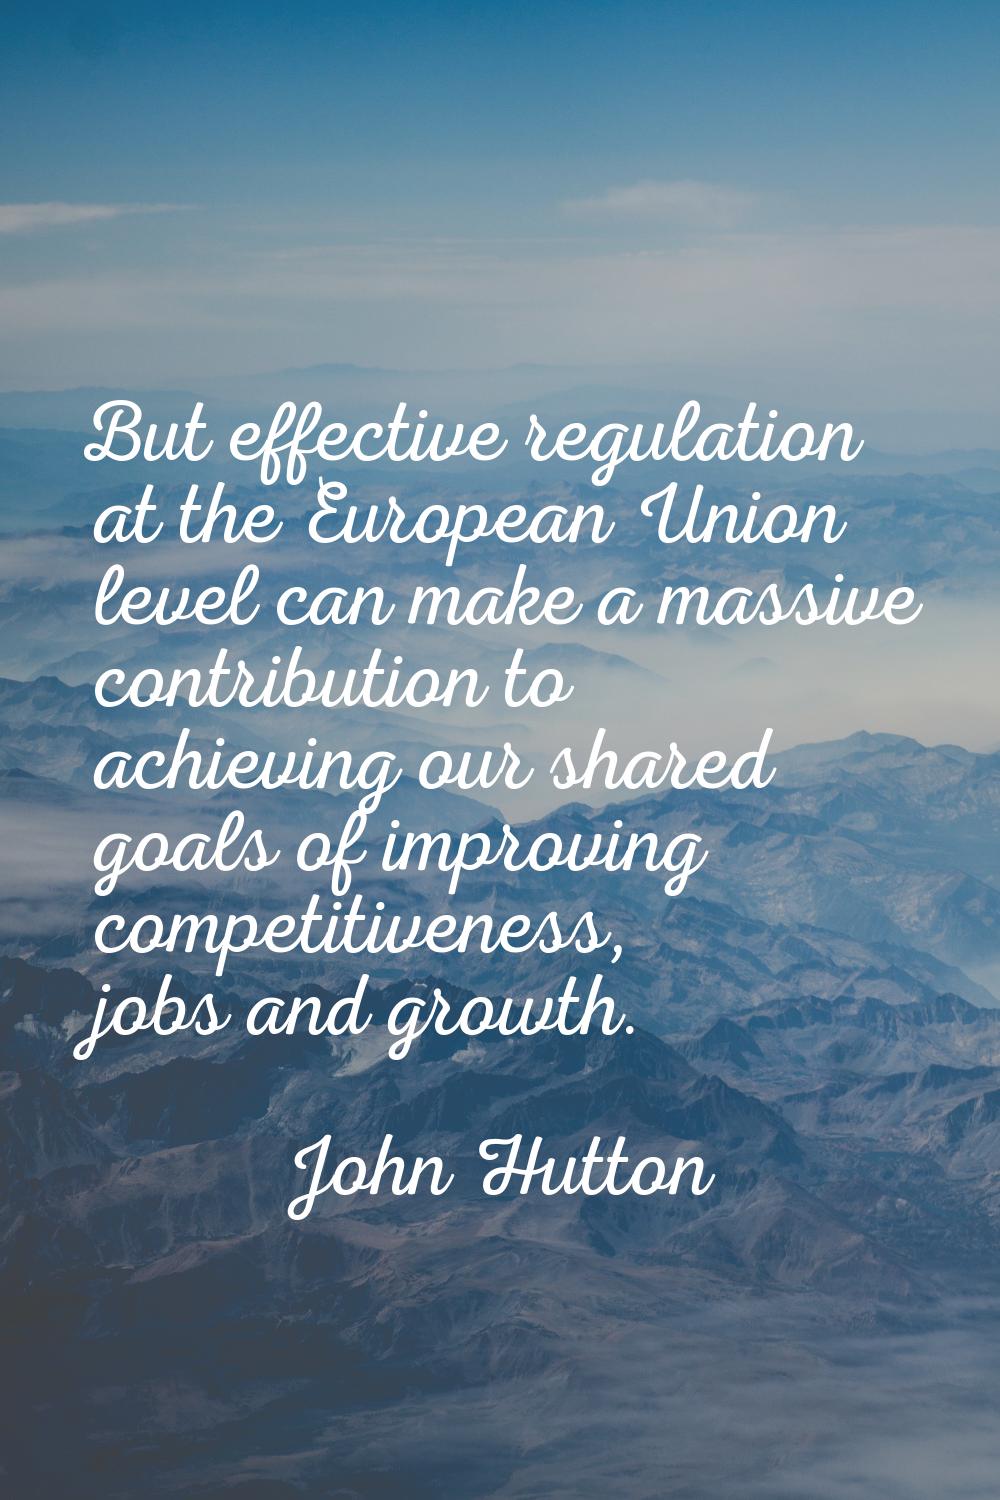 But effective regulation at the European Union level can make a massive contribution to achieving o